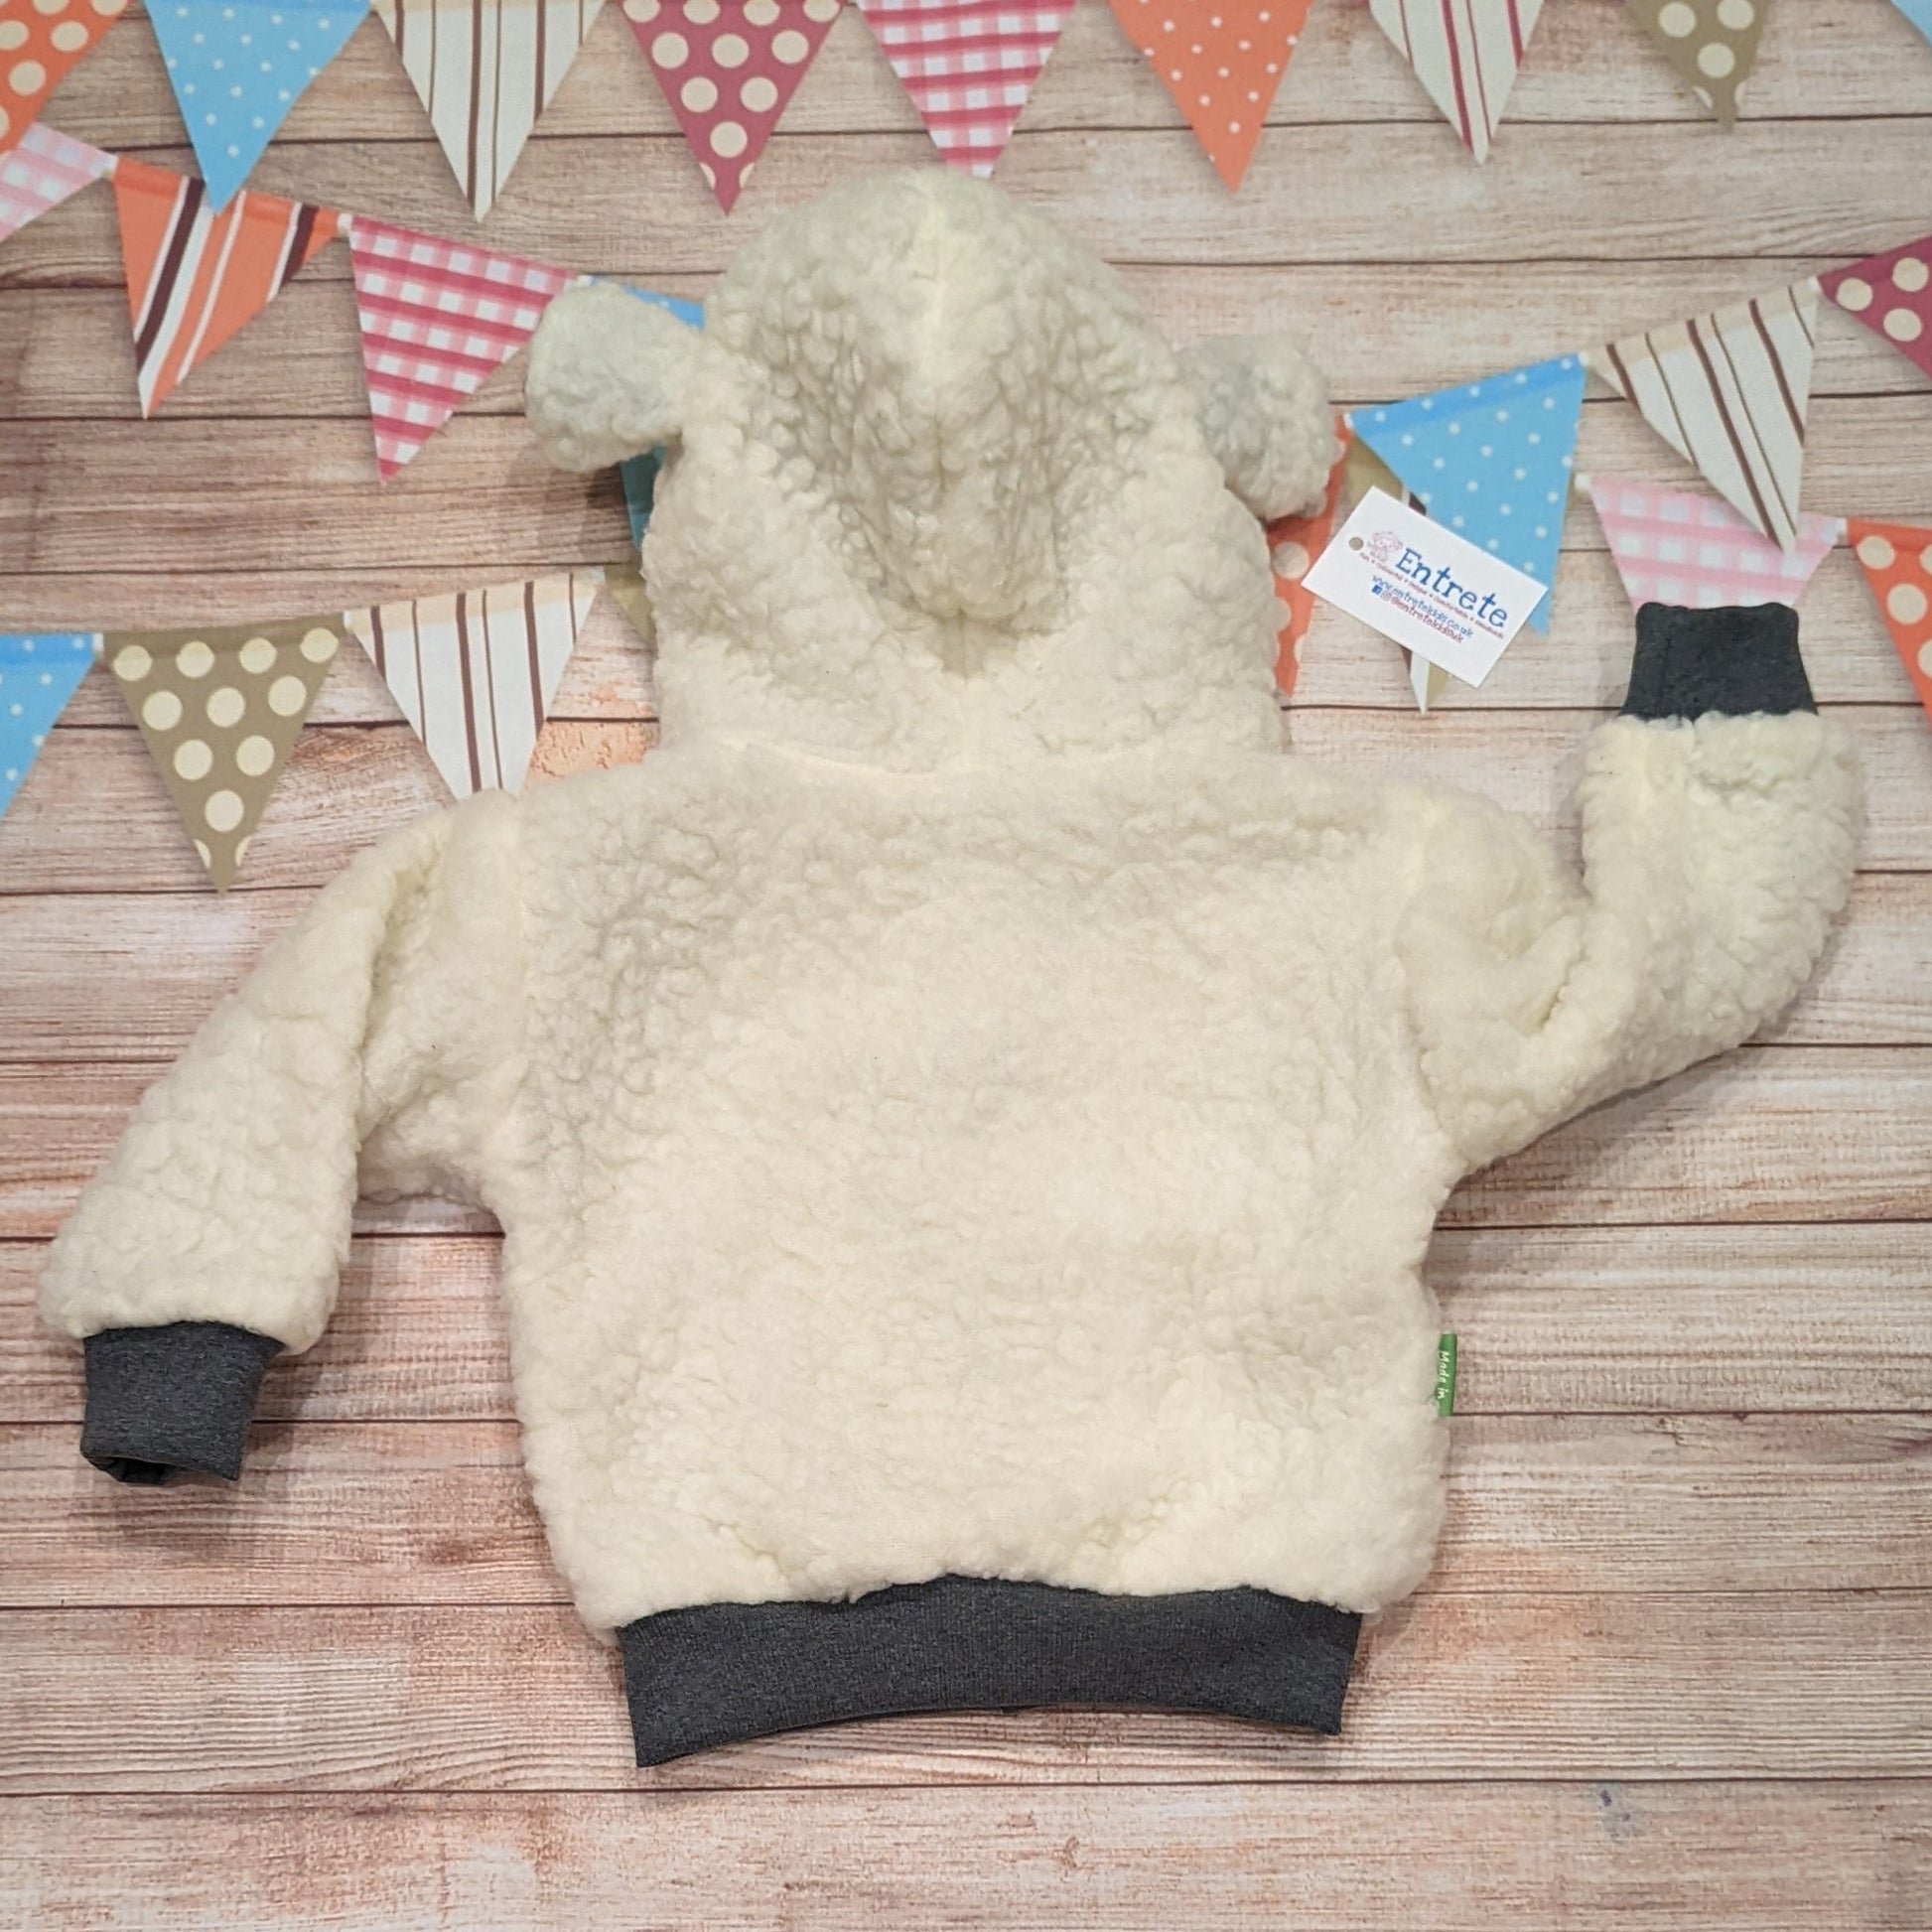 The adorable sheep hoodie handmade using sherpa fur and graphite cotton ribbing, with adorable and fun checkboard farm animals cotton jersey on the reverse. Shown from the rear.